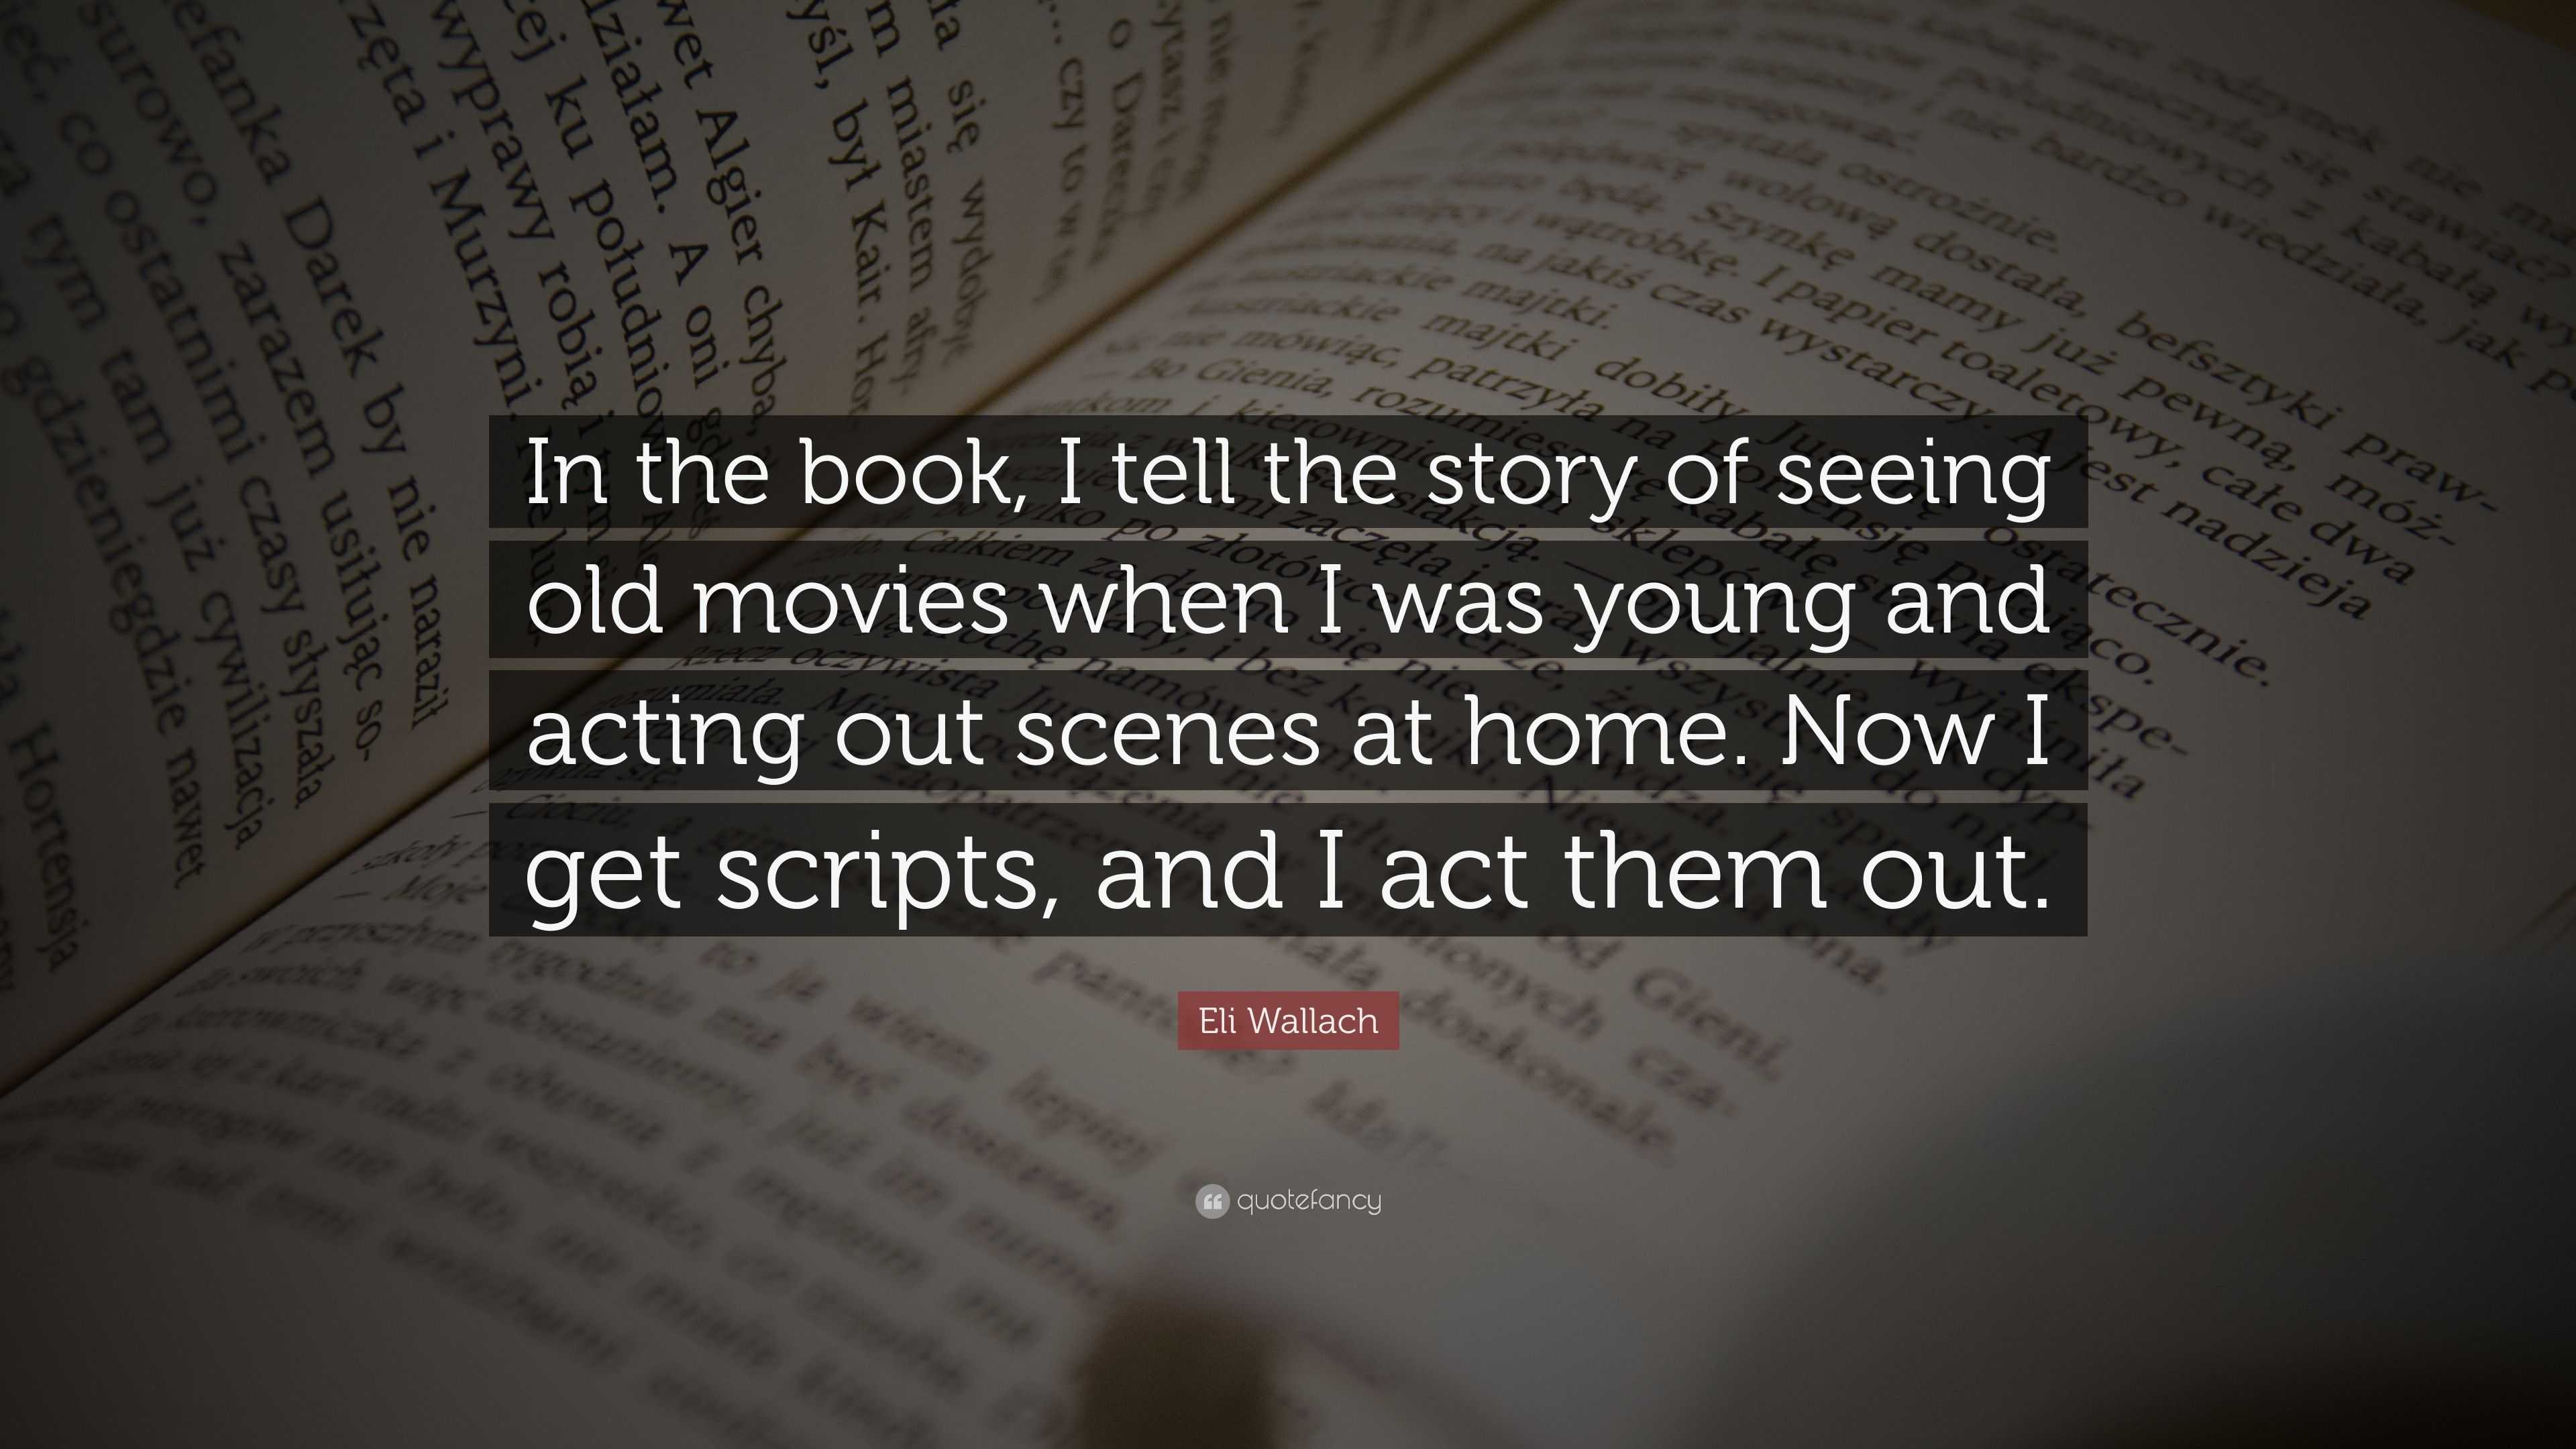 Eli Wallach Quote: “In the book, I tell the story of seeing old movies